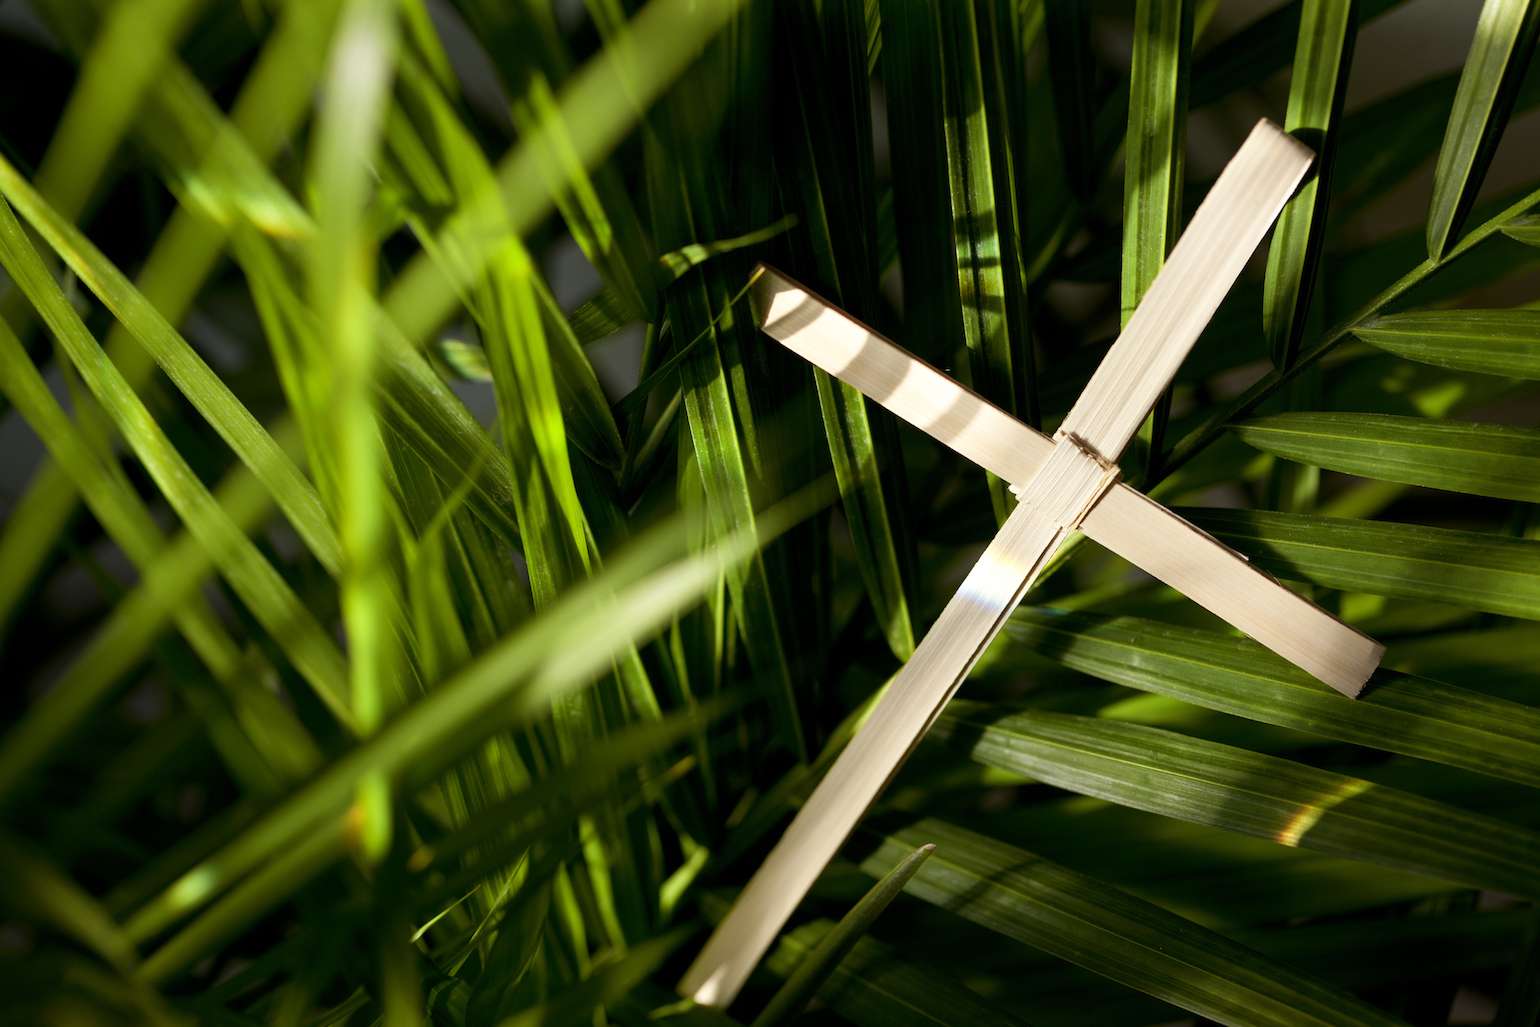 PALM SUNDAY: The Wood Carriers